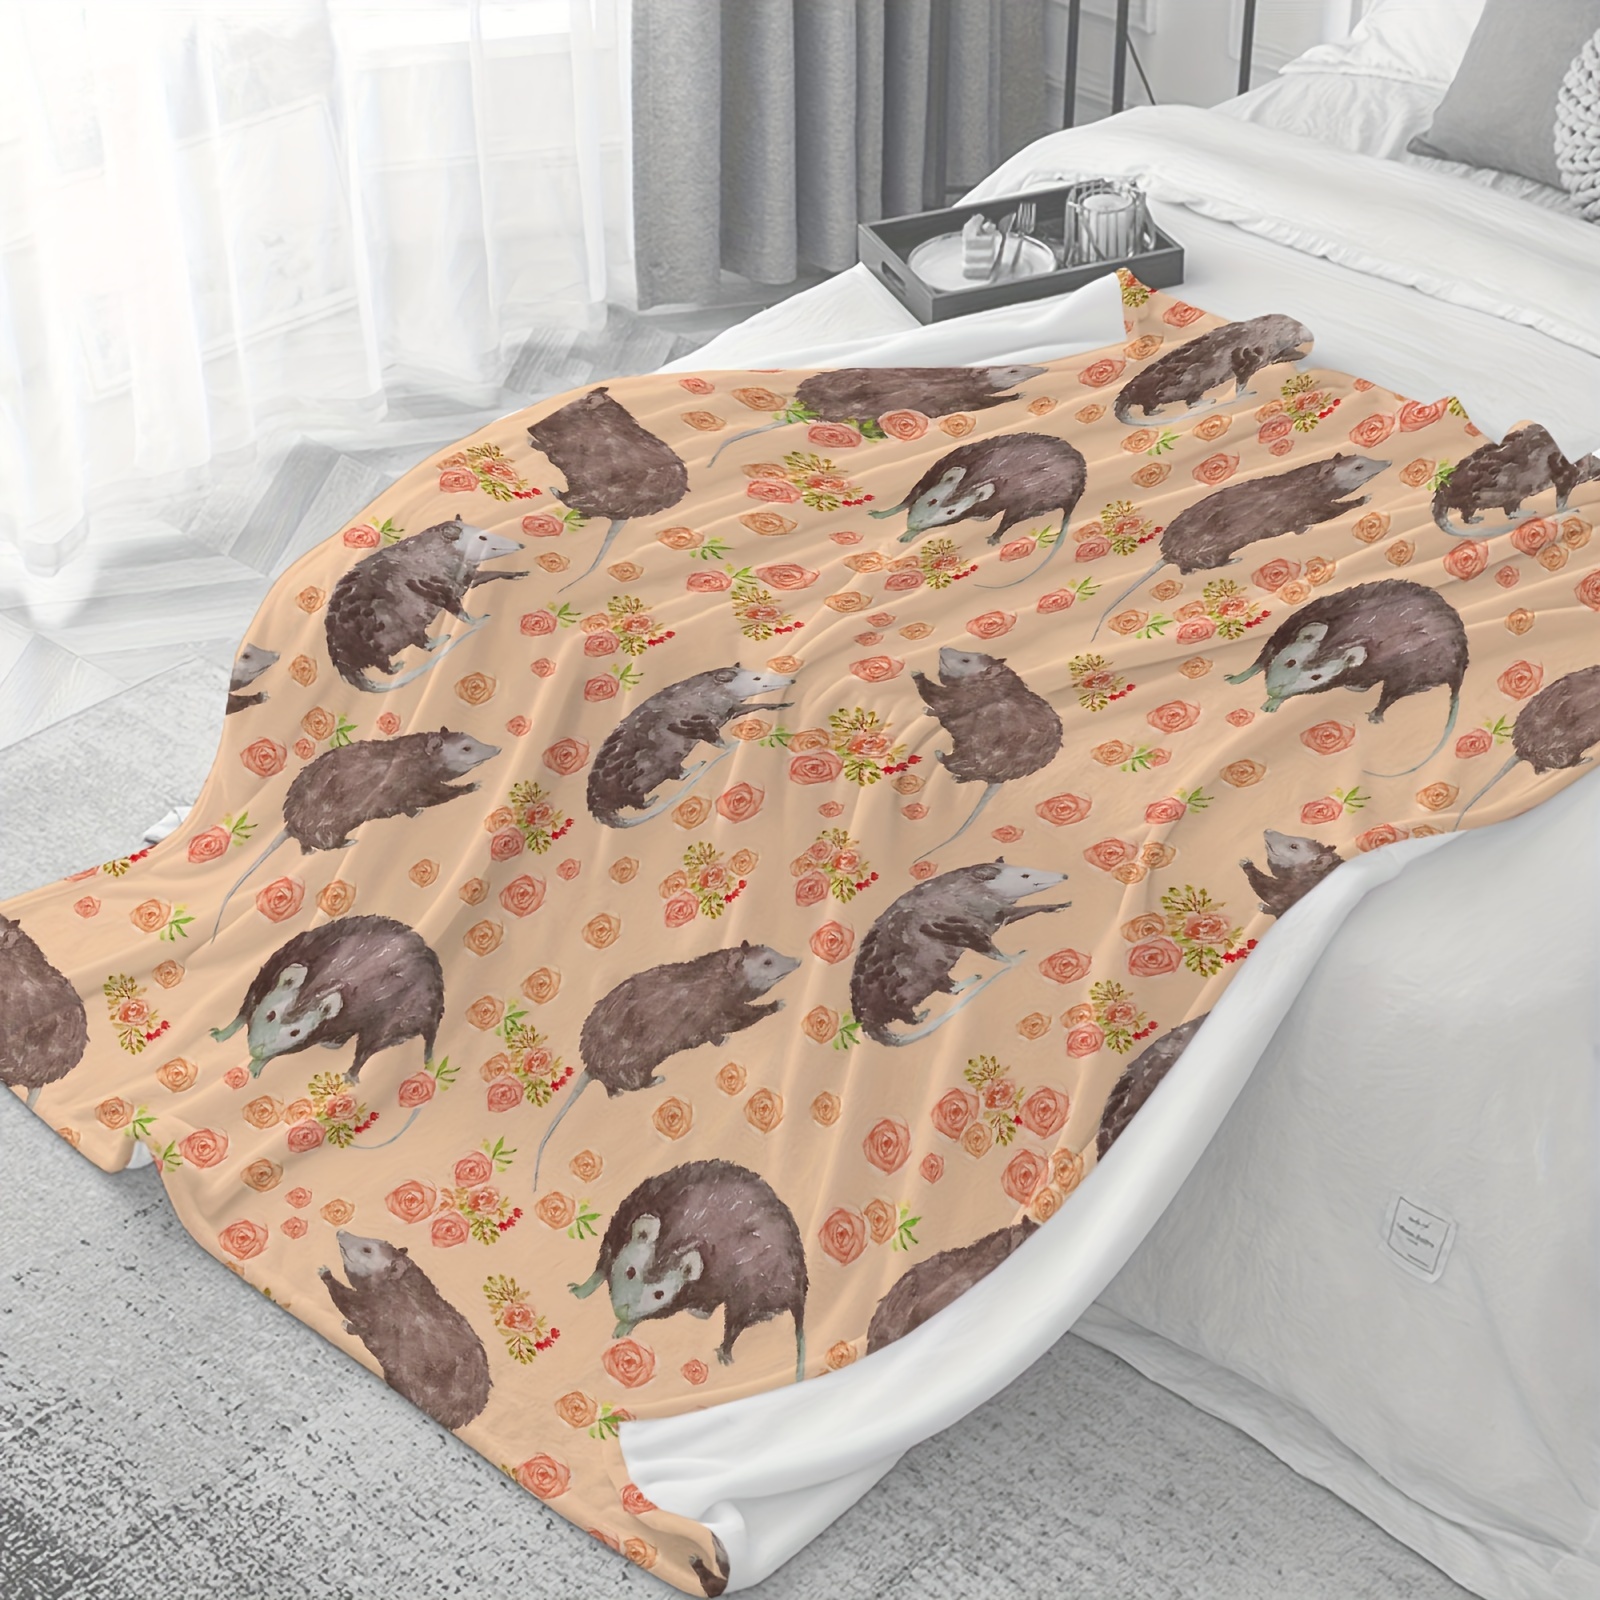 

Possums Flowers Gifts Flannel Fleece Throw Blankets, Super Soft Cozy Blanket For Couch Chair Bed Sofa Office Size 39"x49